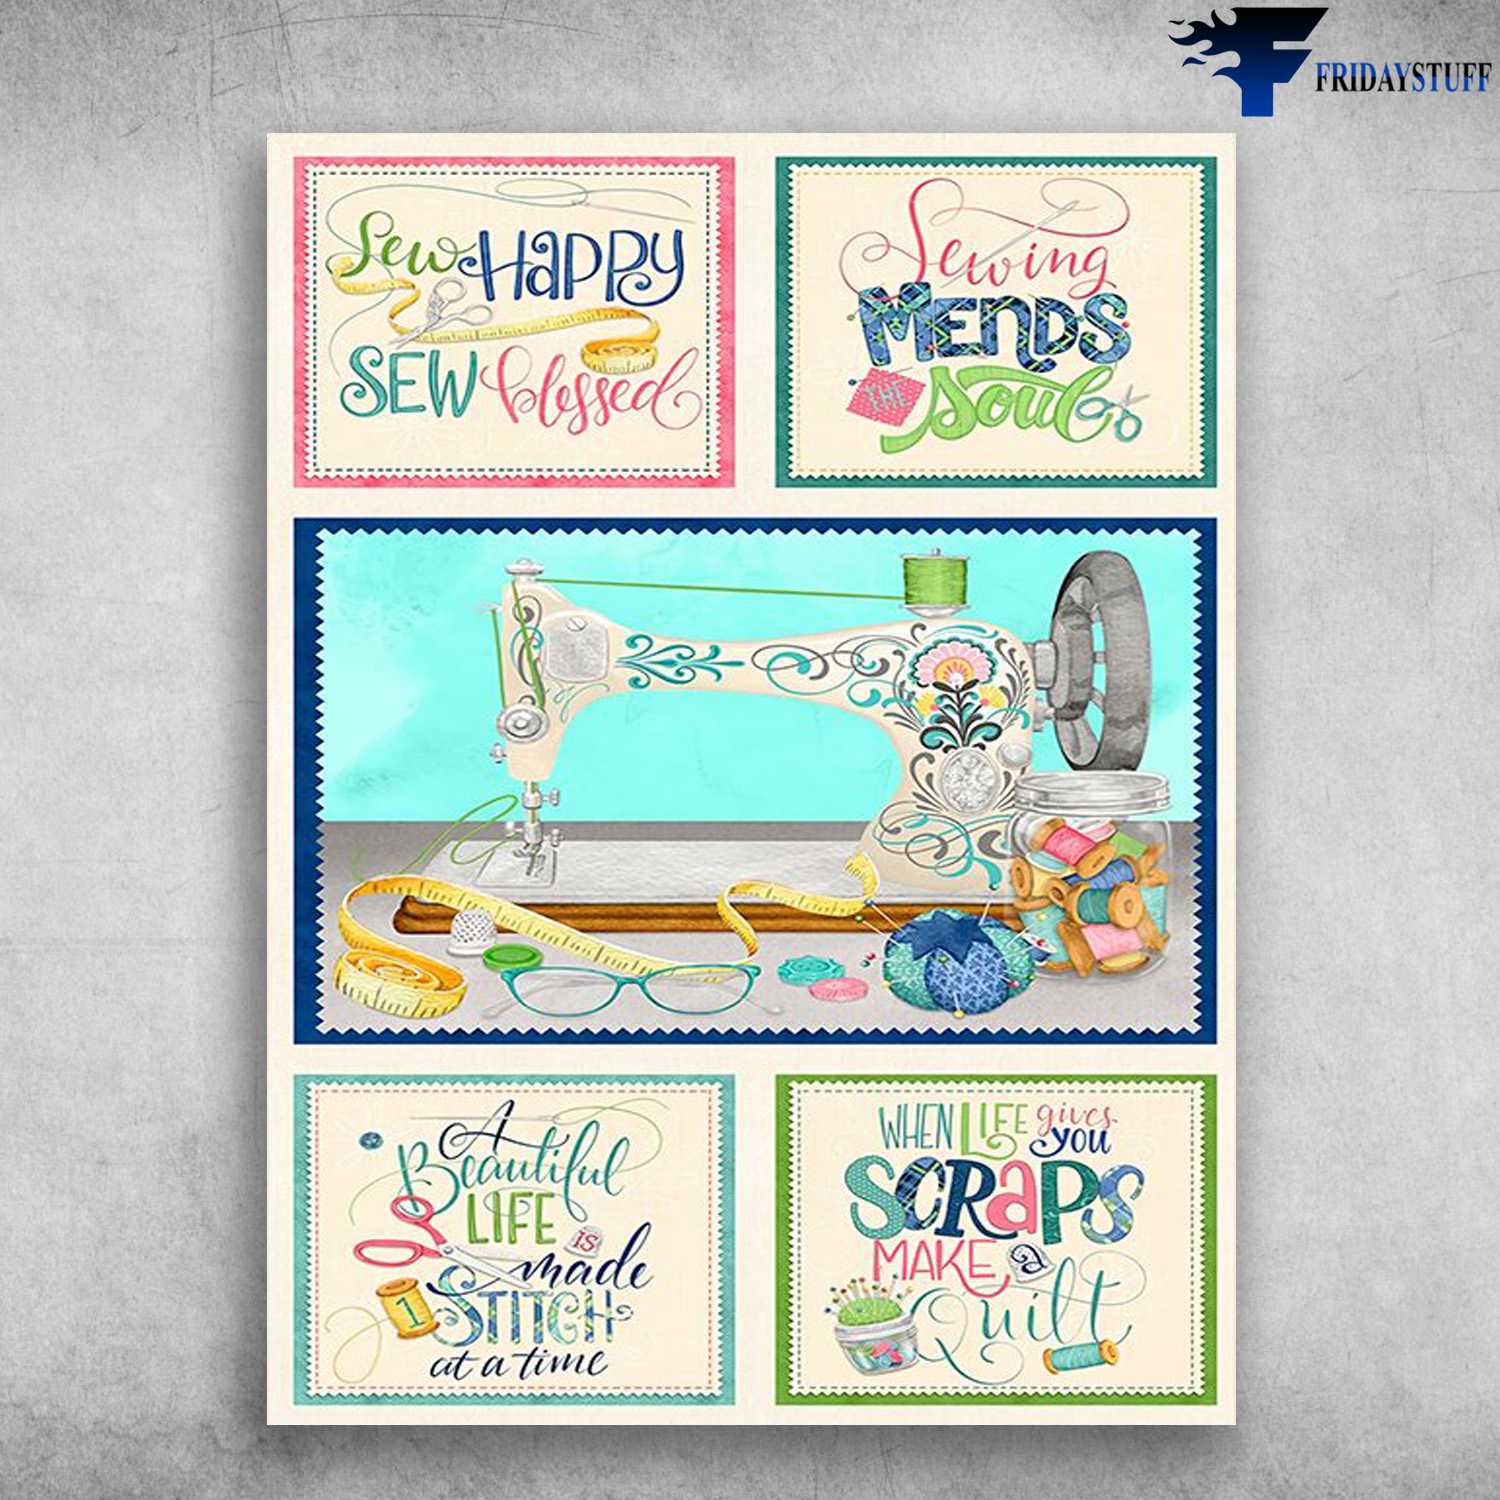 Sewing Poster, Tailor's Gift - Sew Happy, Sew Blessed, Sewing Mends Soul, A Beautiful Life, Is Made Stitch At A Time, When Life Gives You Scraps, Make A Quilt